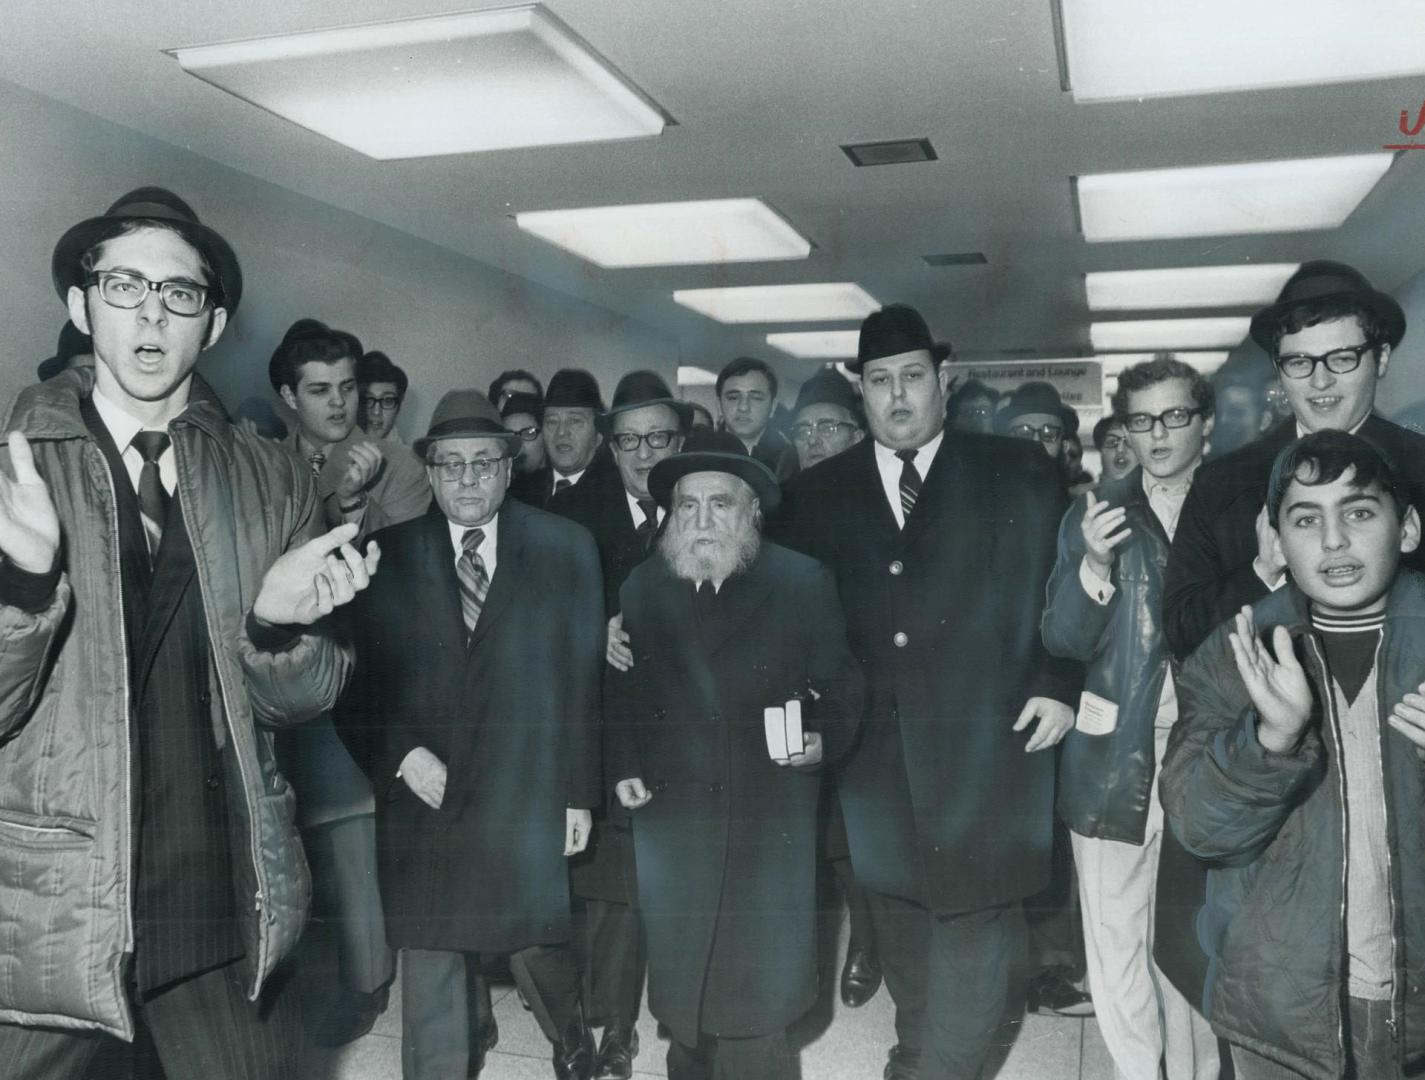 'Rabbi of the Rabbis' is Welcomed to Toronto, Bearded Rabbi Moishe Feinstein (centre), one of world's leading authorities on Jewish religious law, wal(...)